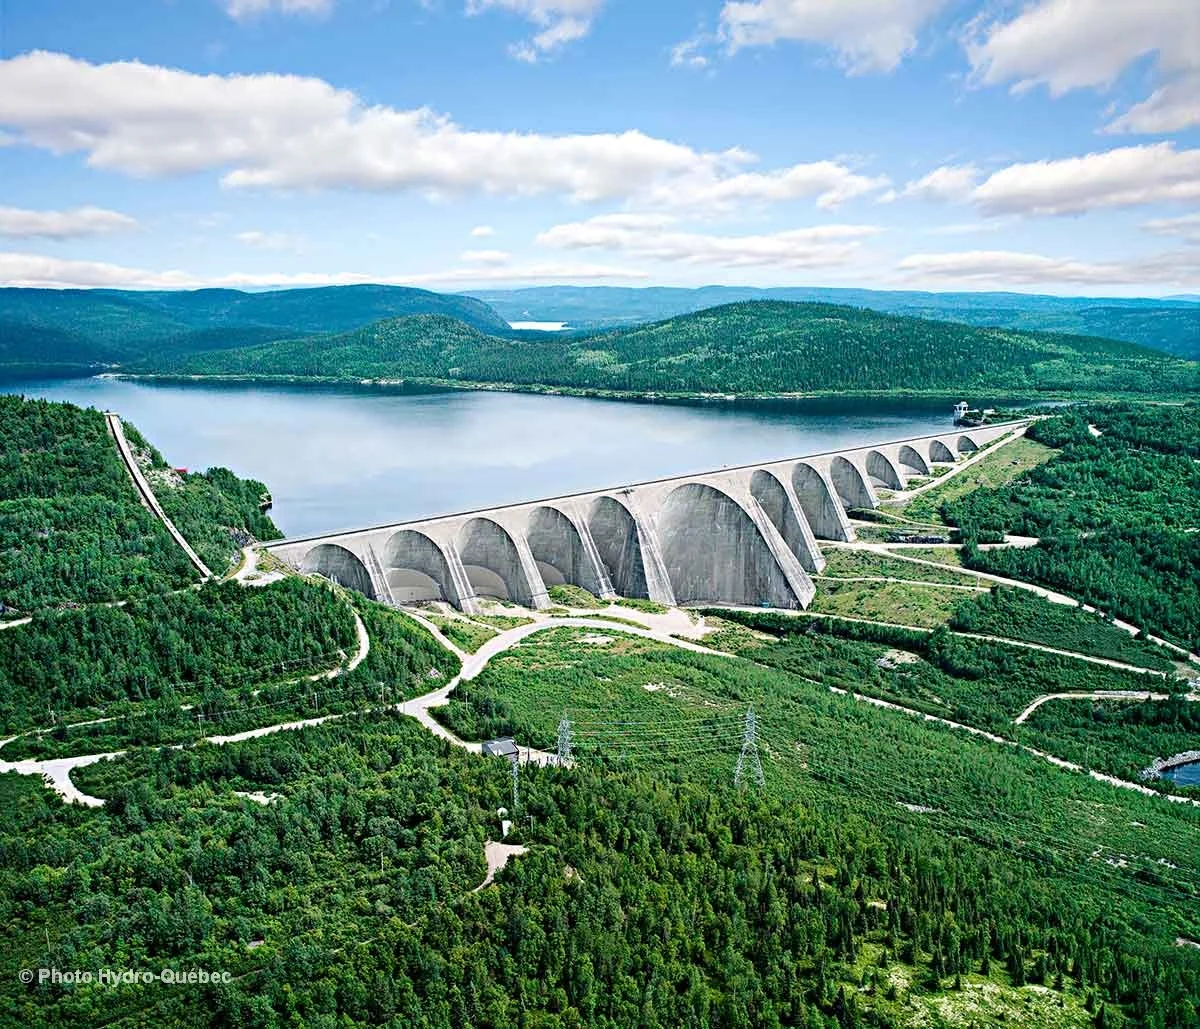 Hydroelectricity makes up more than half of Canada's energy generation. Image: Daniel Johnson Dam, courtesy Hydro Quebec